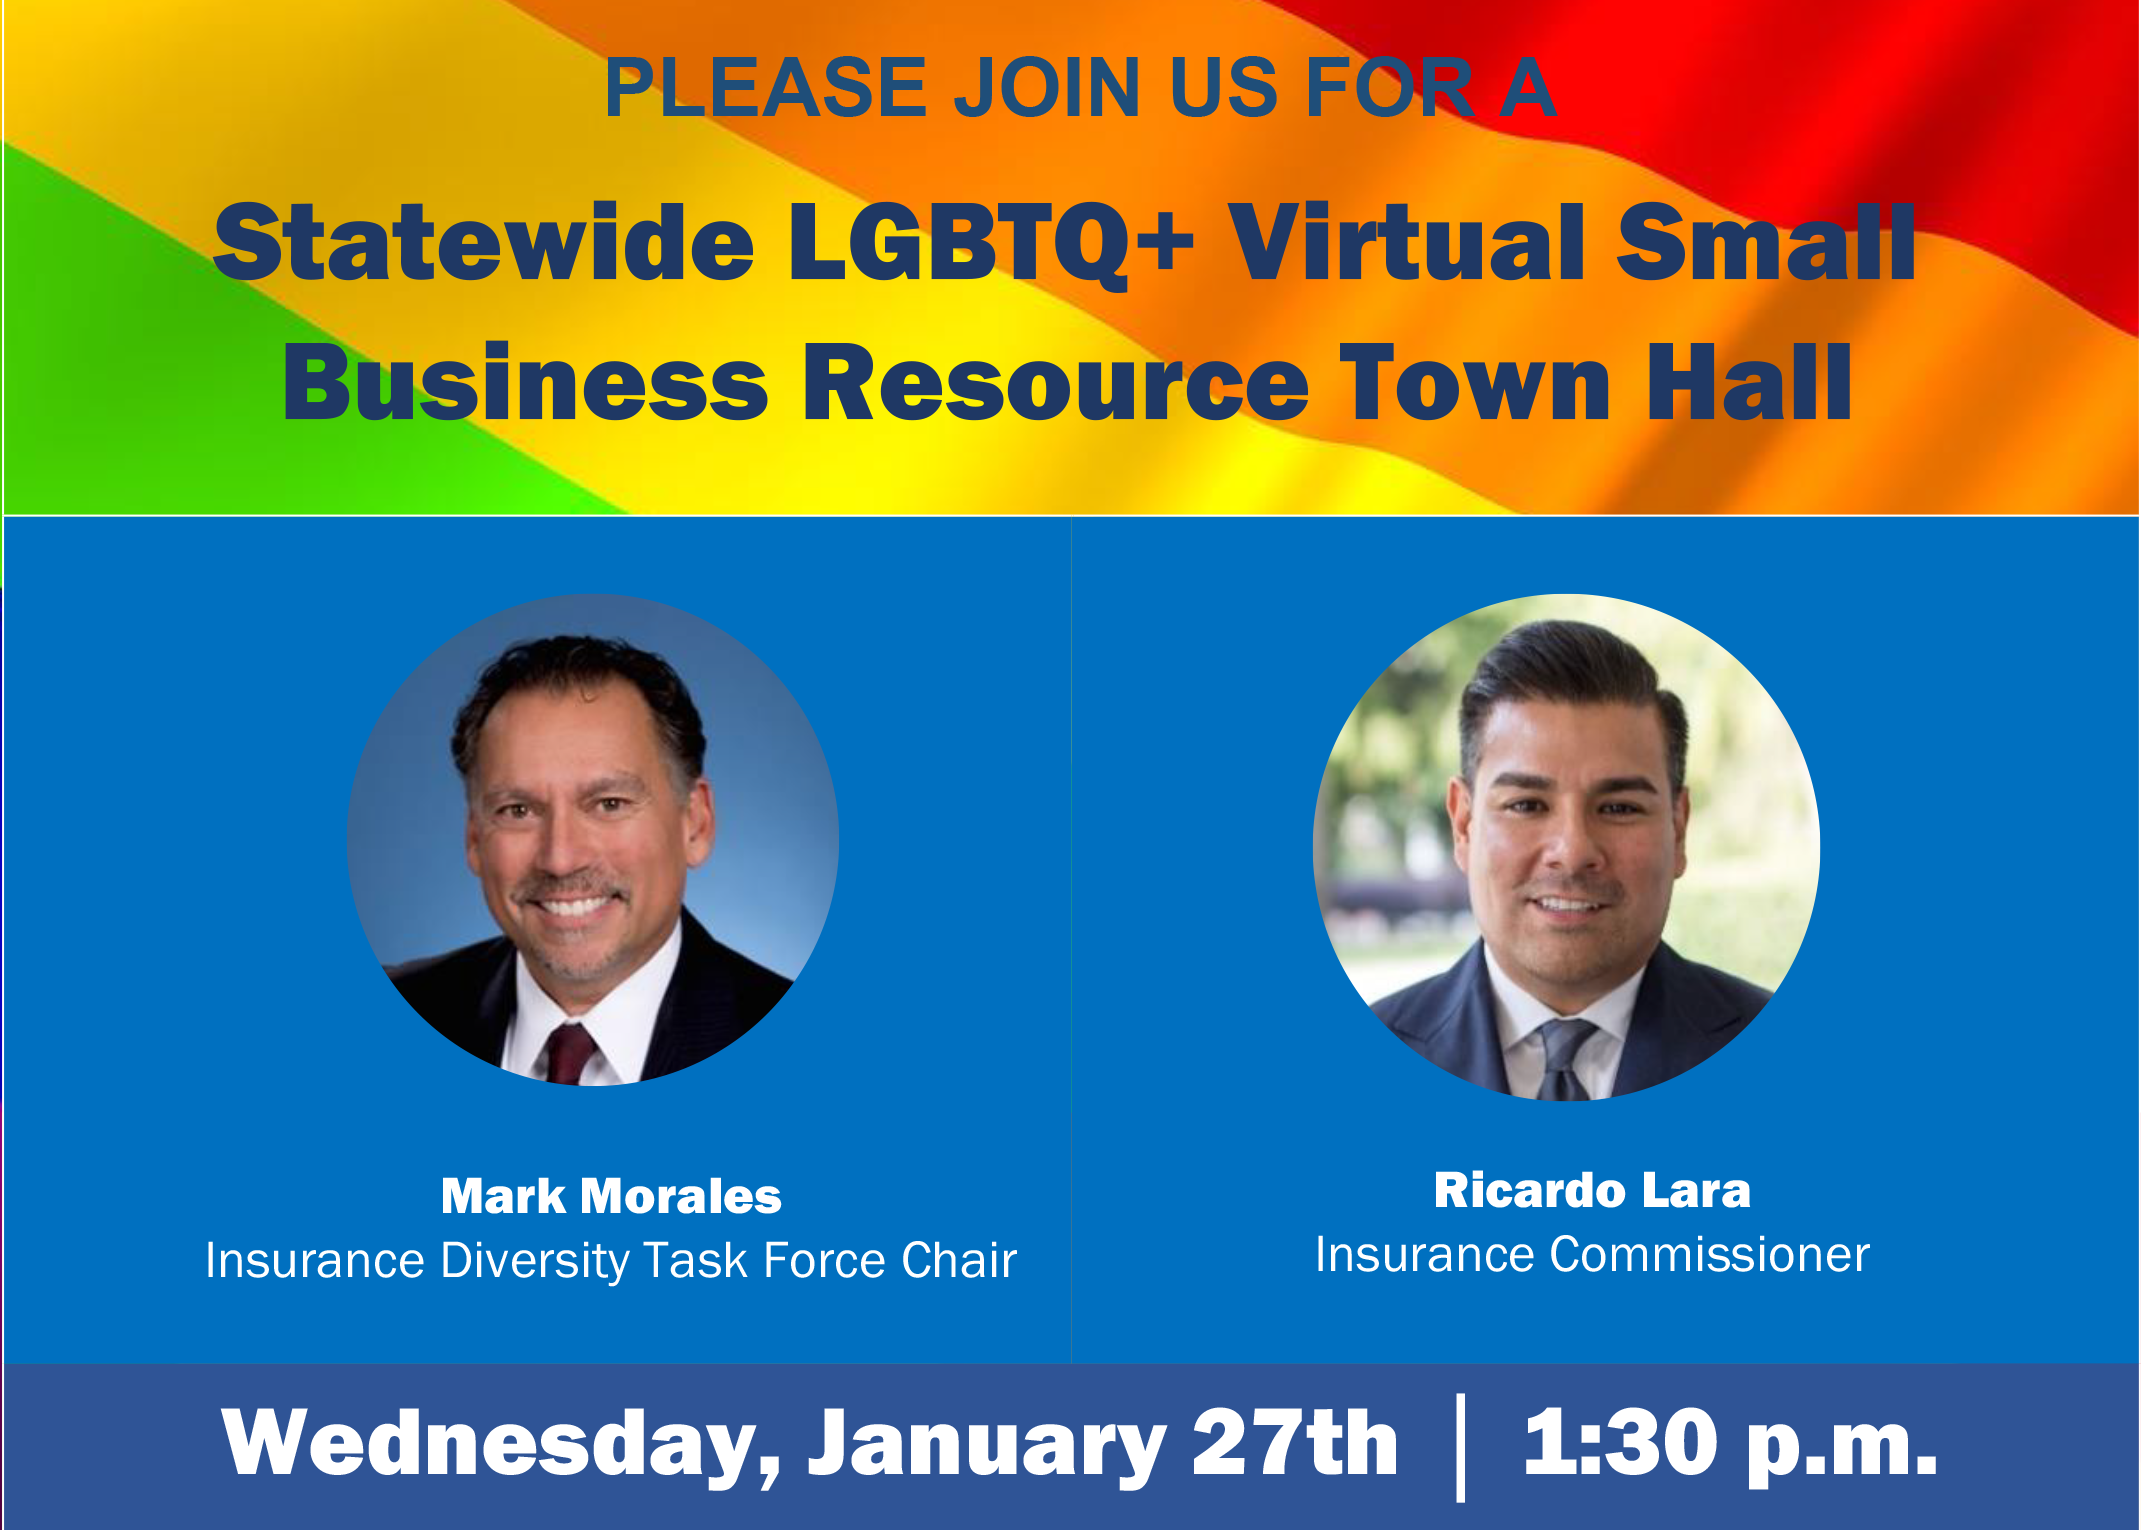 PLEASE JOIN US FOR A Statewide LGBTQ+ Virtual Small Business Resource Town Hall
With Mark Morales Insurance Diversity Task Force Chair &amp; Ricardo Lara Insurance Commissioner on Wednesday, January 27th at 1:30 pm